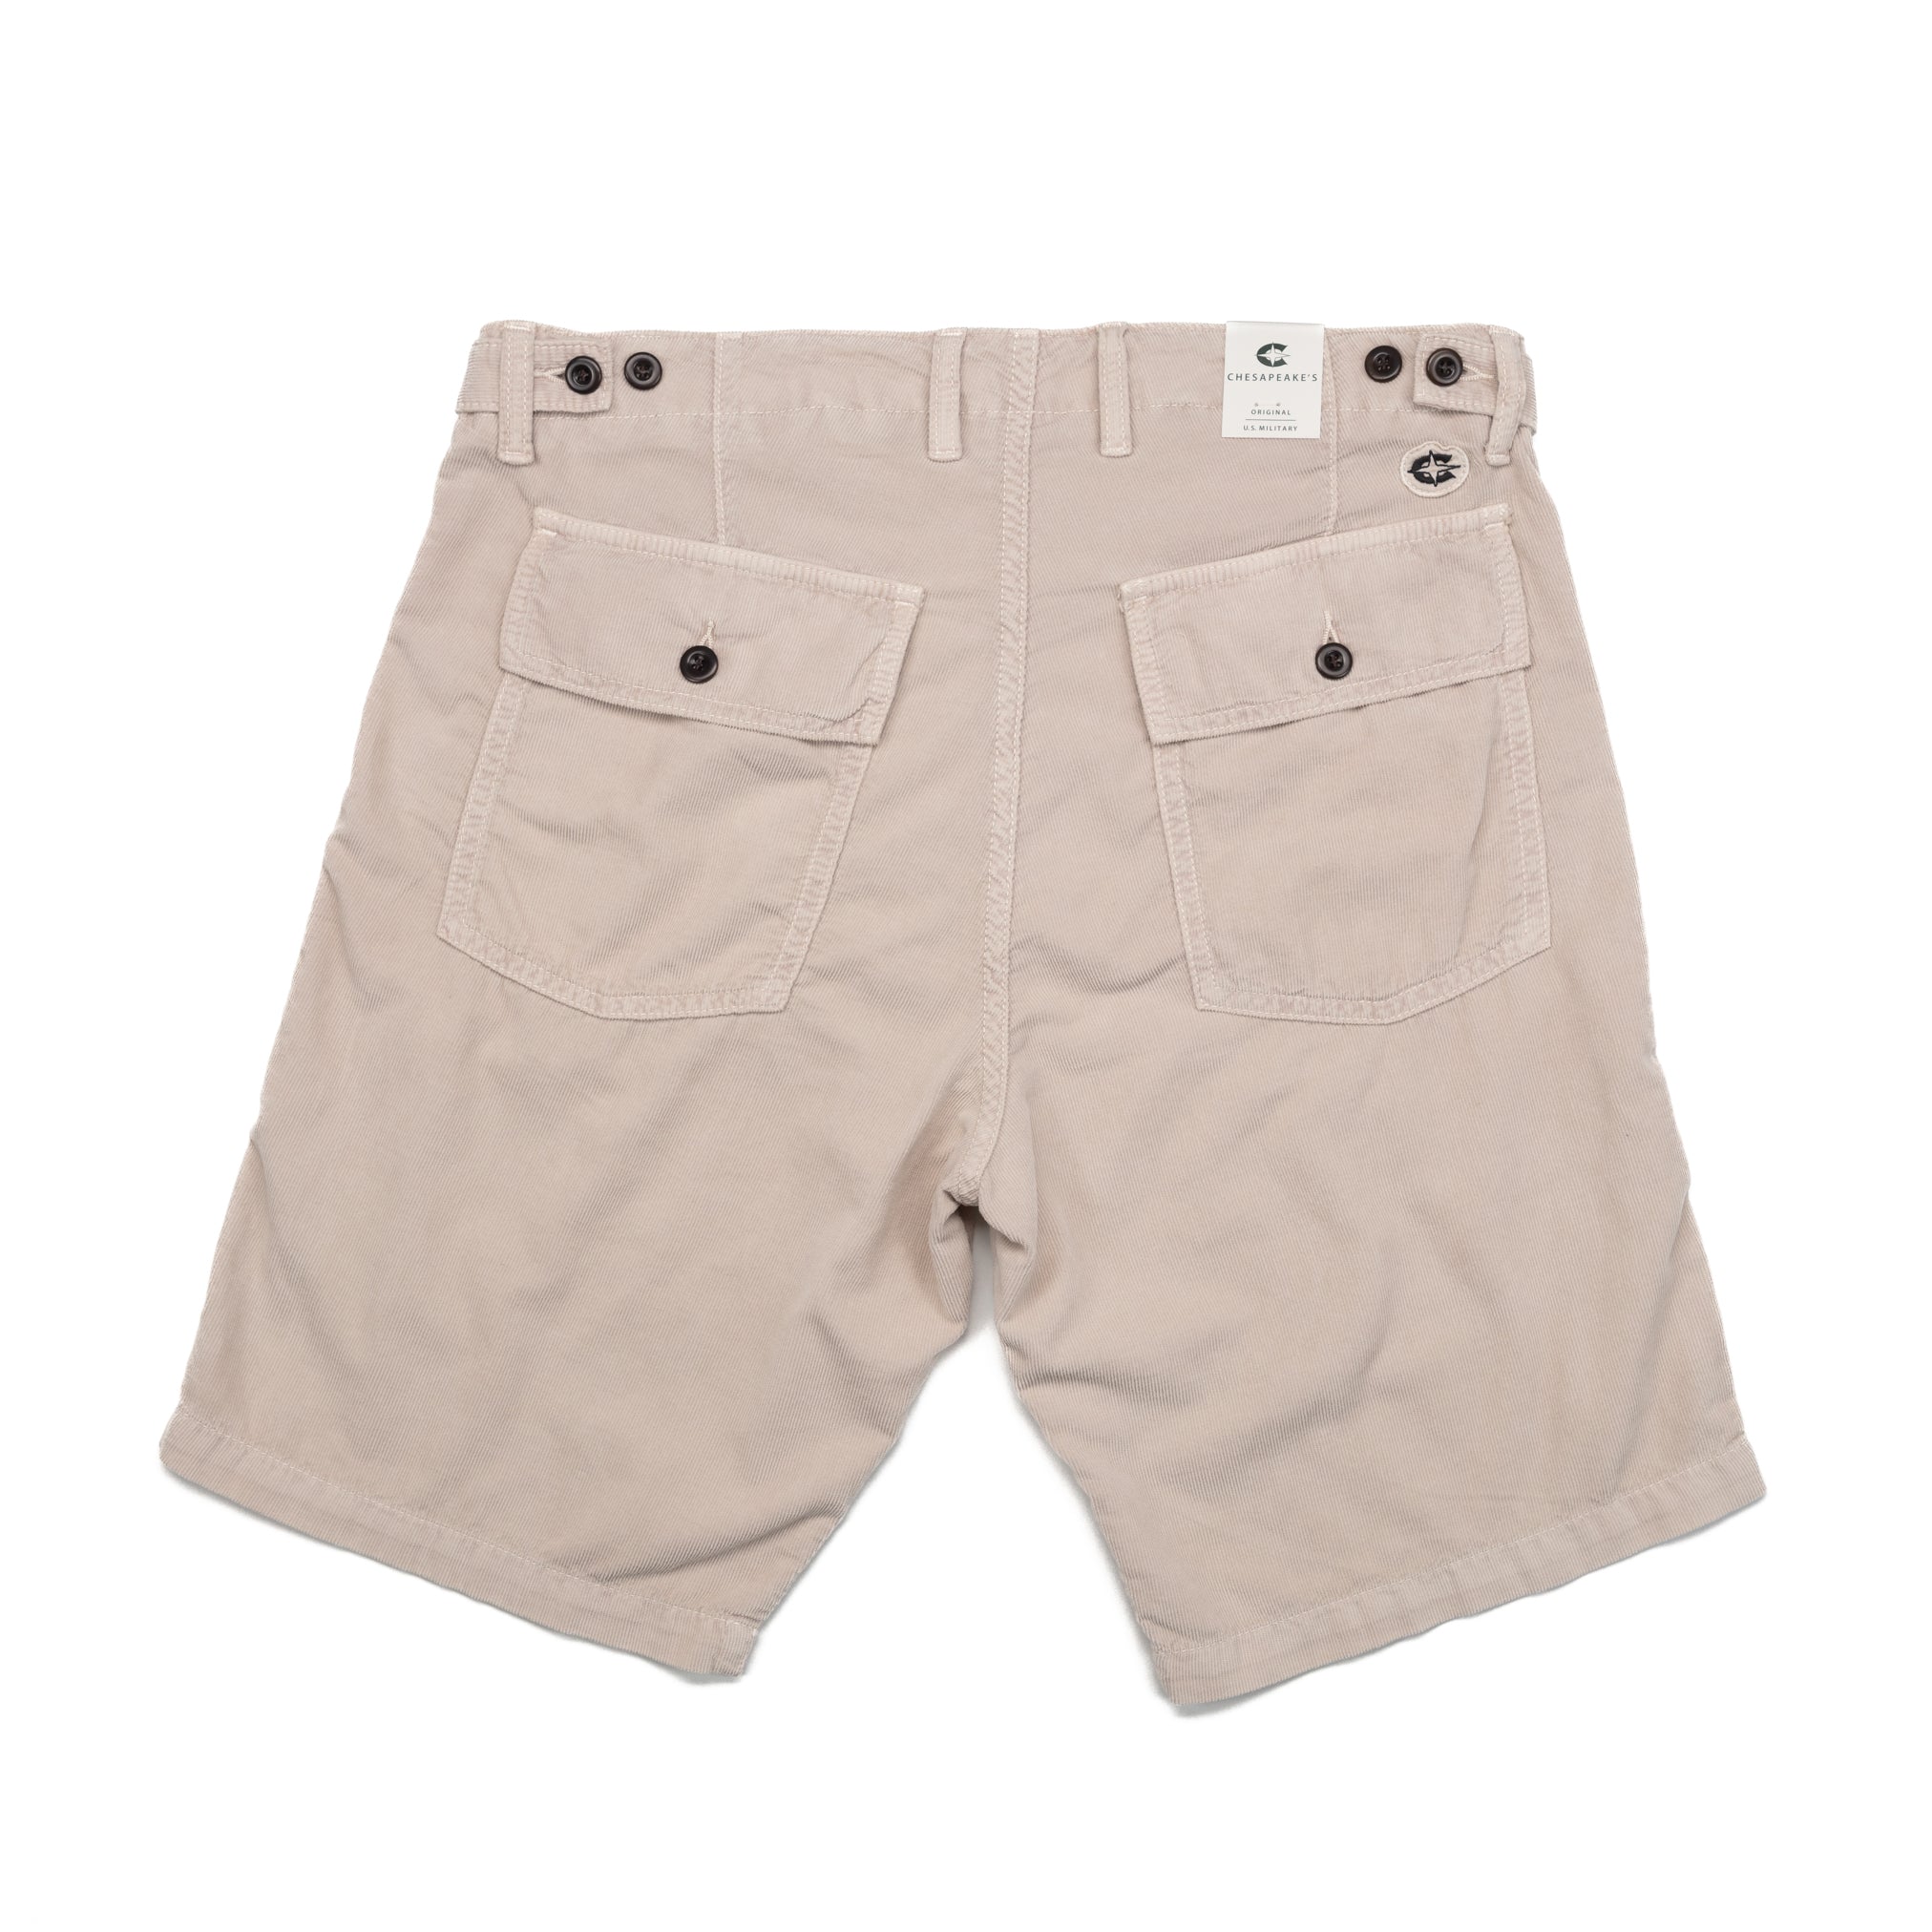 Shannon Fatigue Shorts in Sand Cord